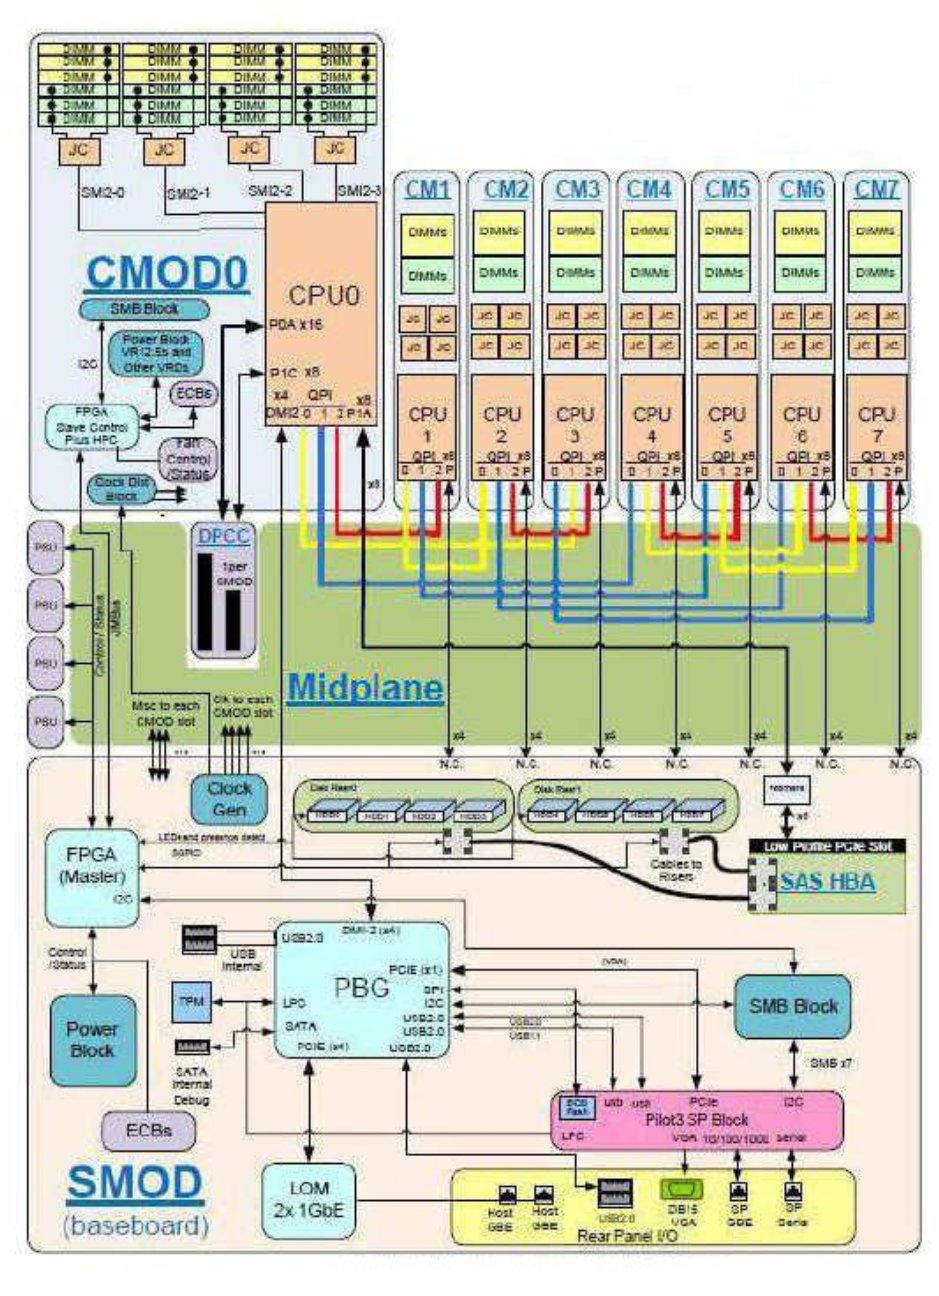 image:A block diagram graphic of the server.